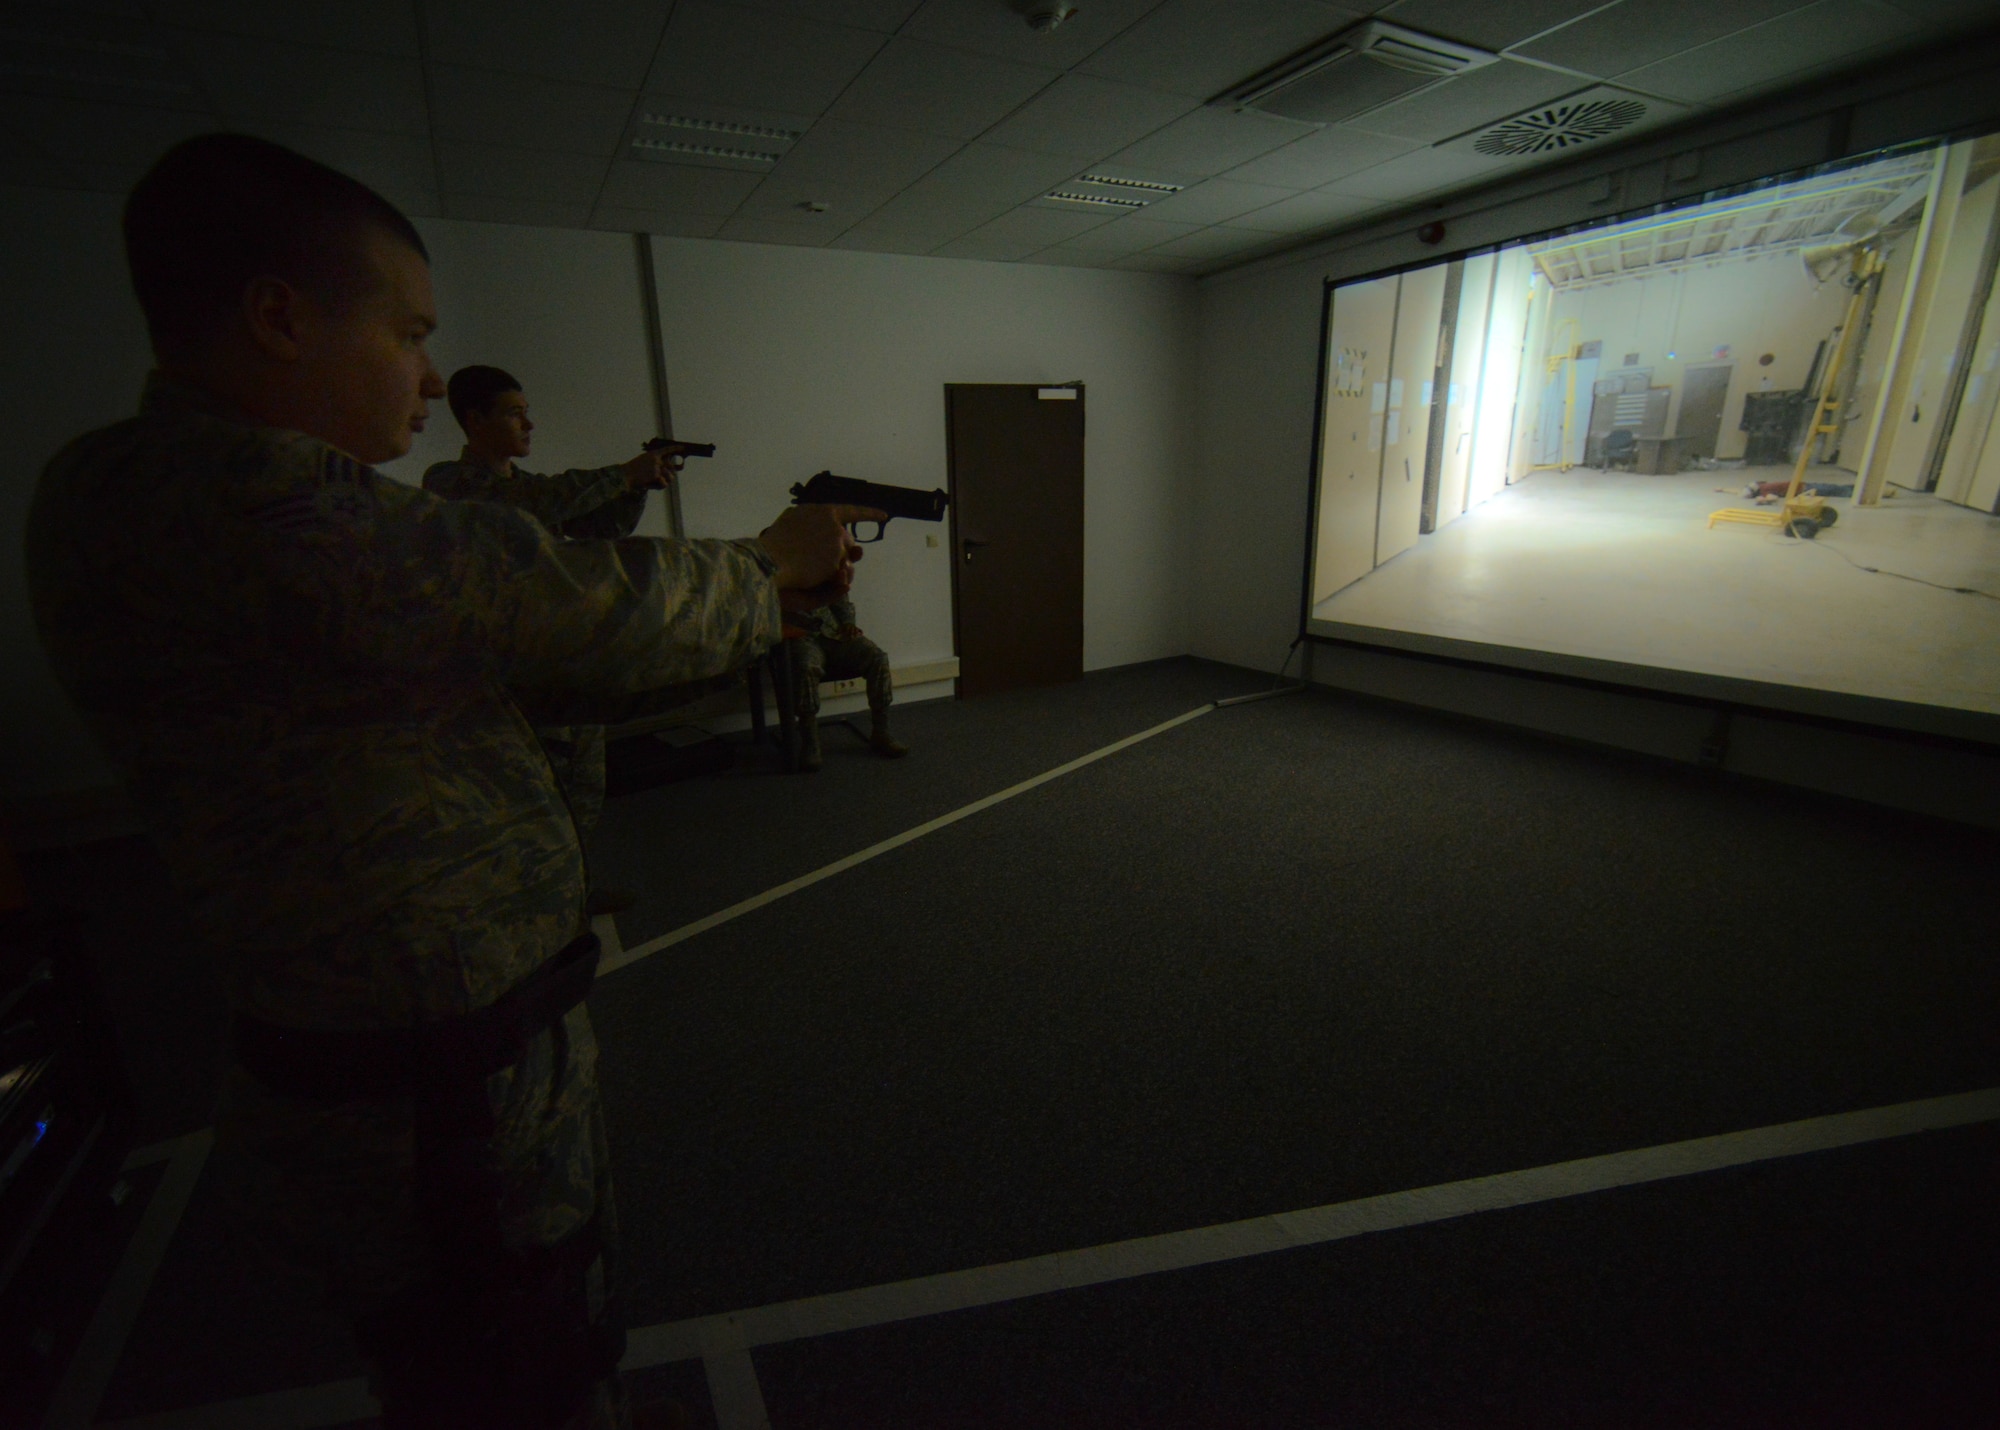 Airmen assigned to the 86th Security Forces Squadron react to a scenario during a firearms training system exercise at Ramstein Air Base, Germany, March 6, 2015.  The Air Force-wide system allows law enforcement a virtual experience with the use of laser-pointed air-compressed weapons on a training system similar to an interactive video game. (U.S. Air Force photo/Senior Airman Nicole Sikorski)